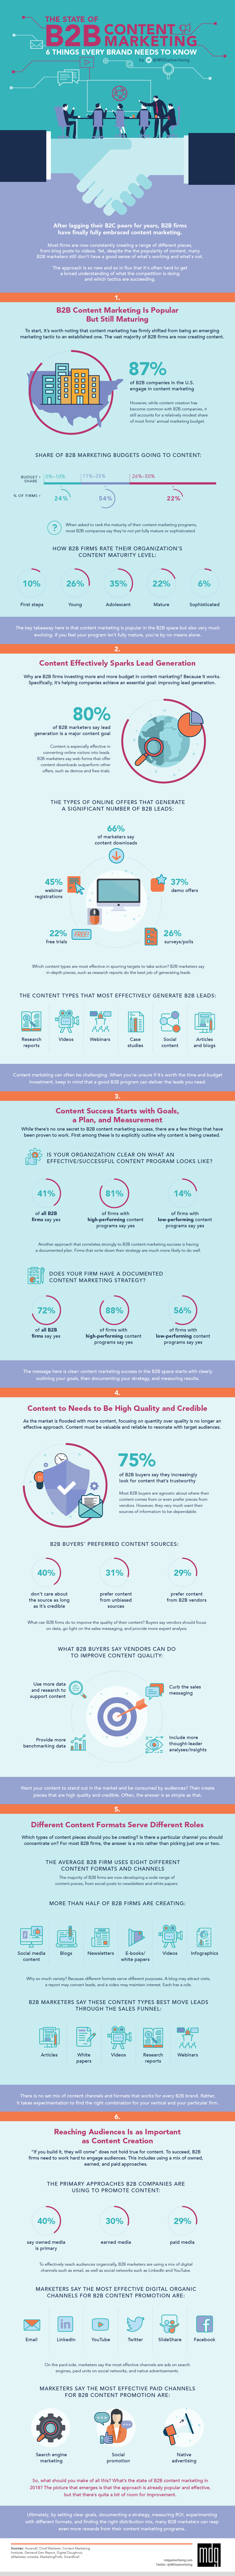 The State of B2B Content Marketing: 6 Things Every Brand Need to Know [Infographic]